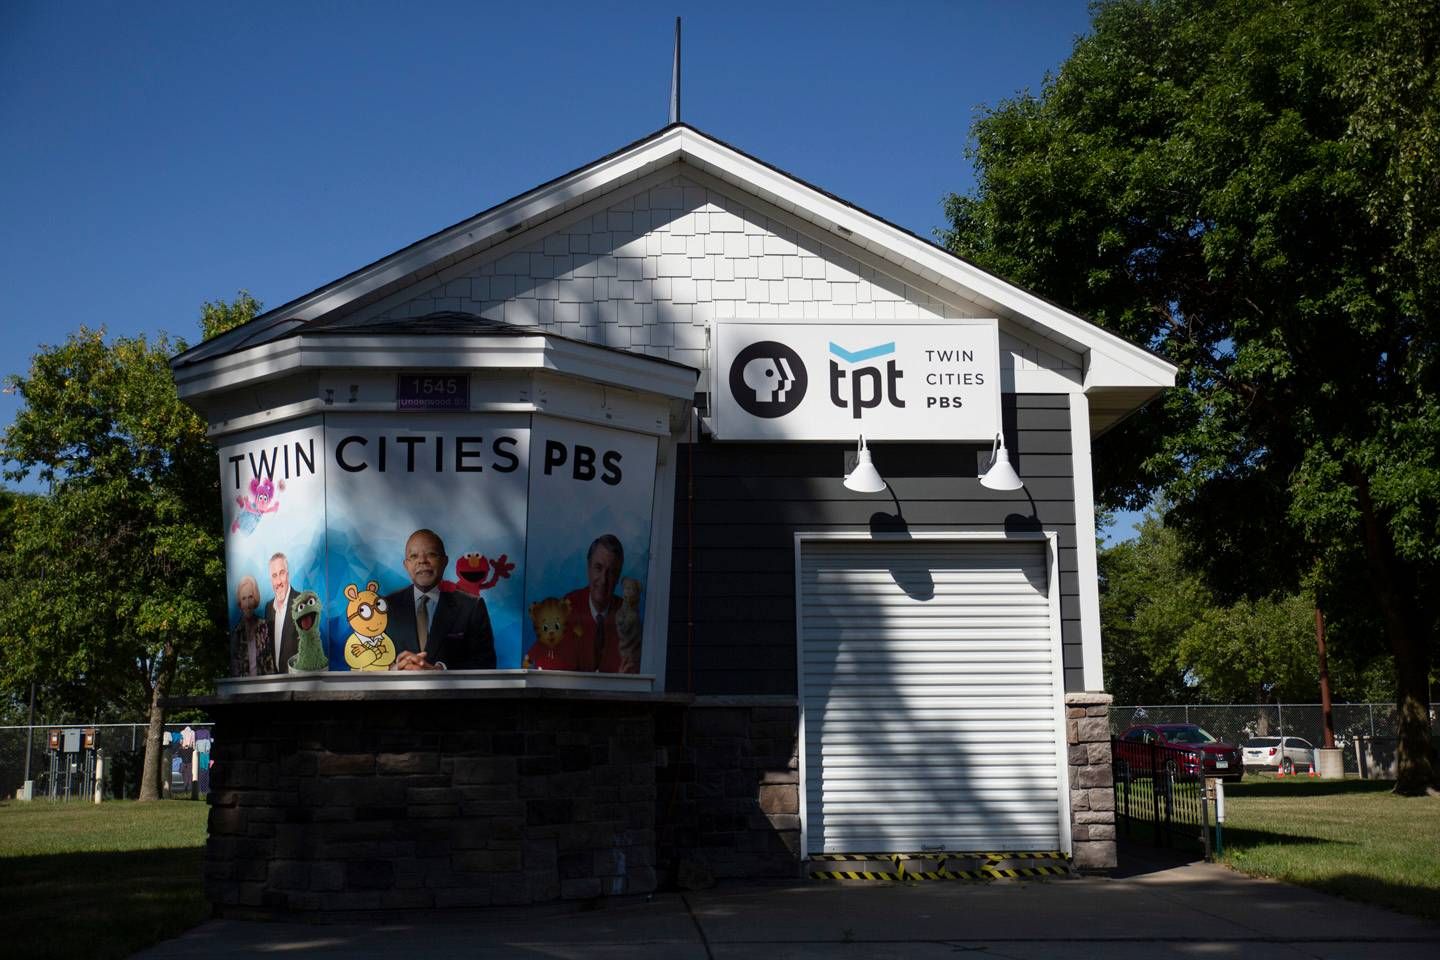 White TPT booth at the Minnesota State Fair with images of Mr. Rogers, Elmo, and other PBS characters.